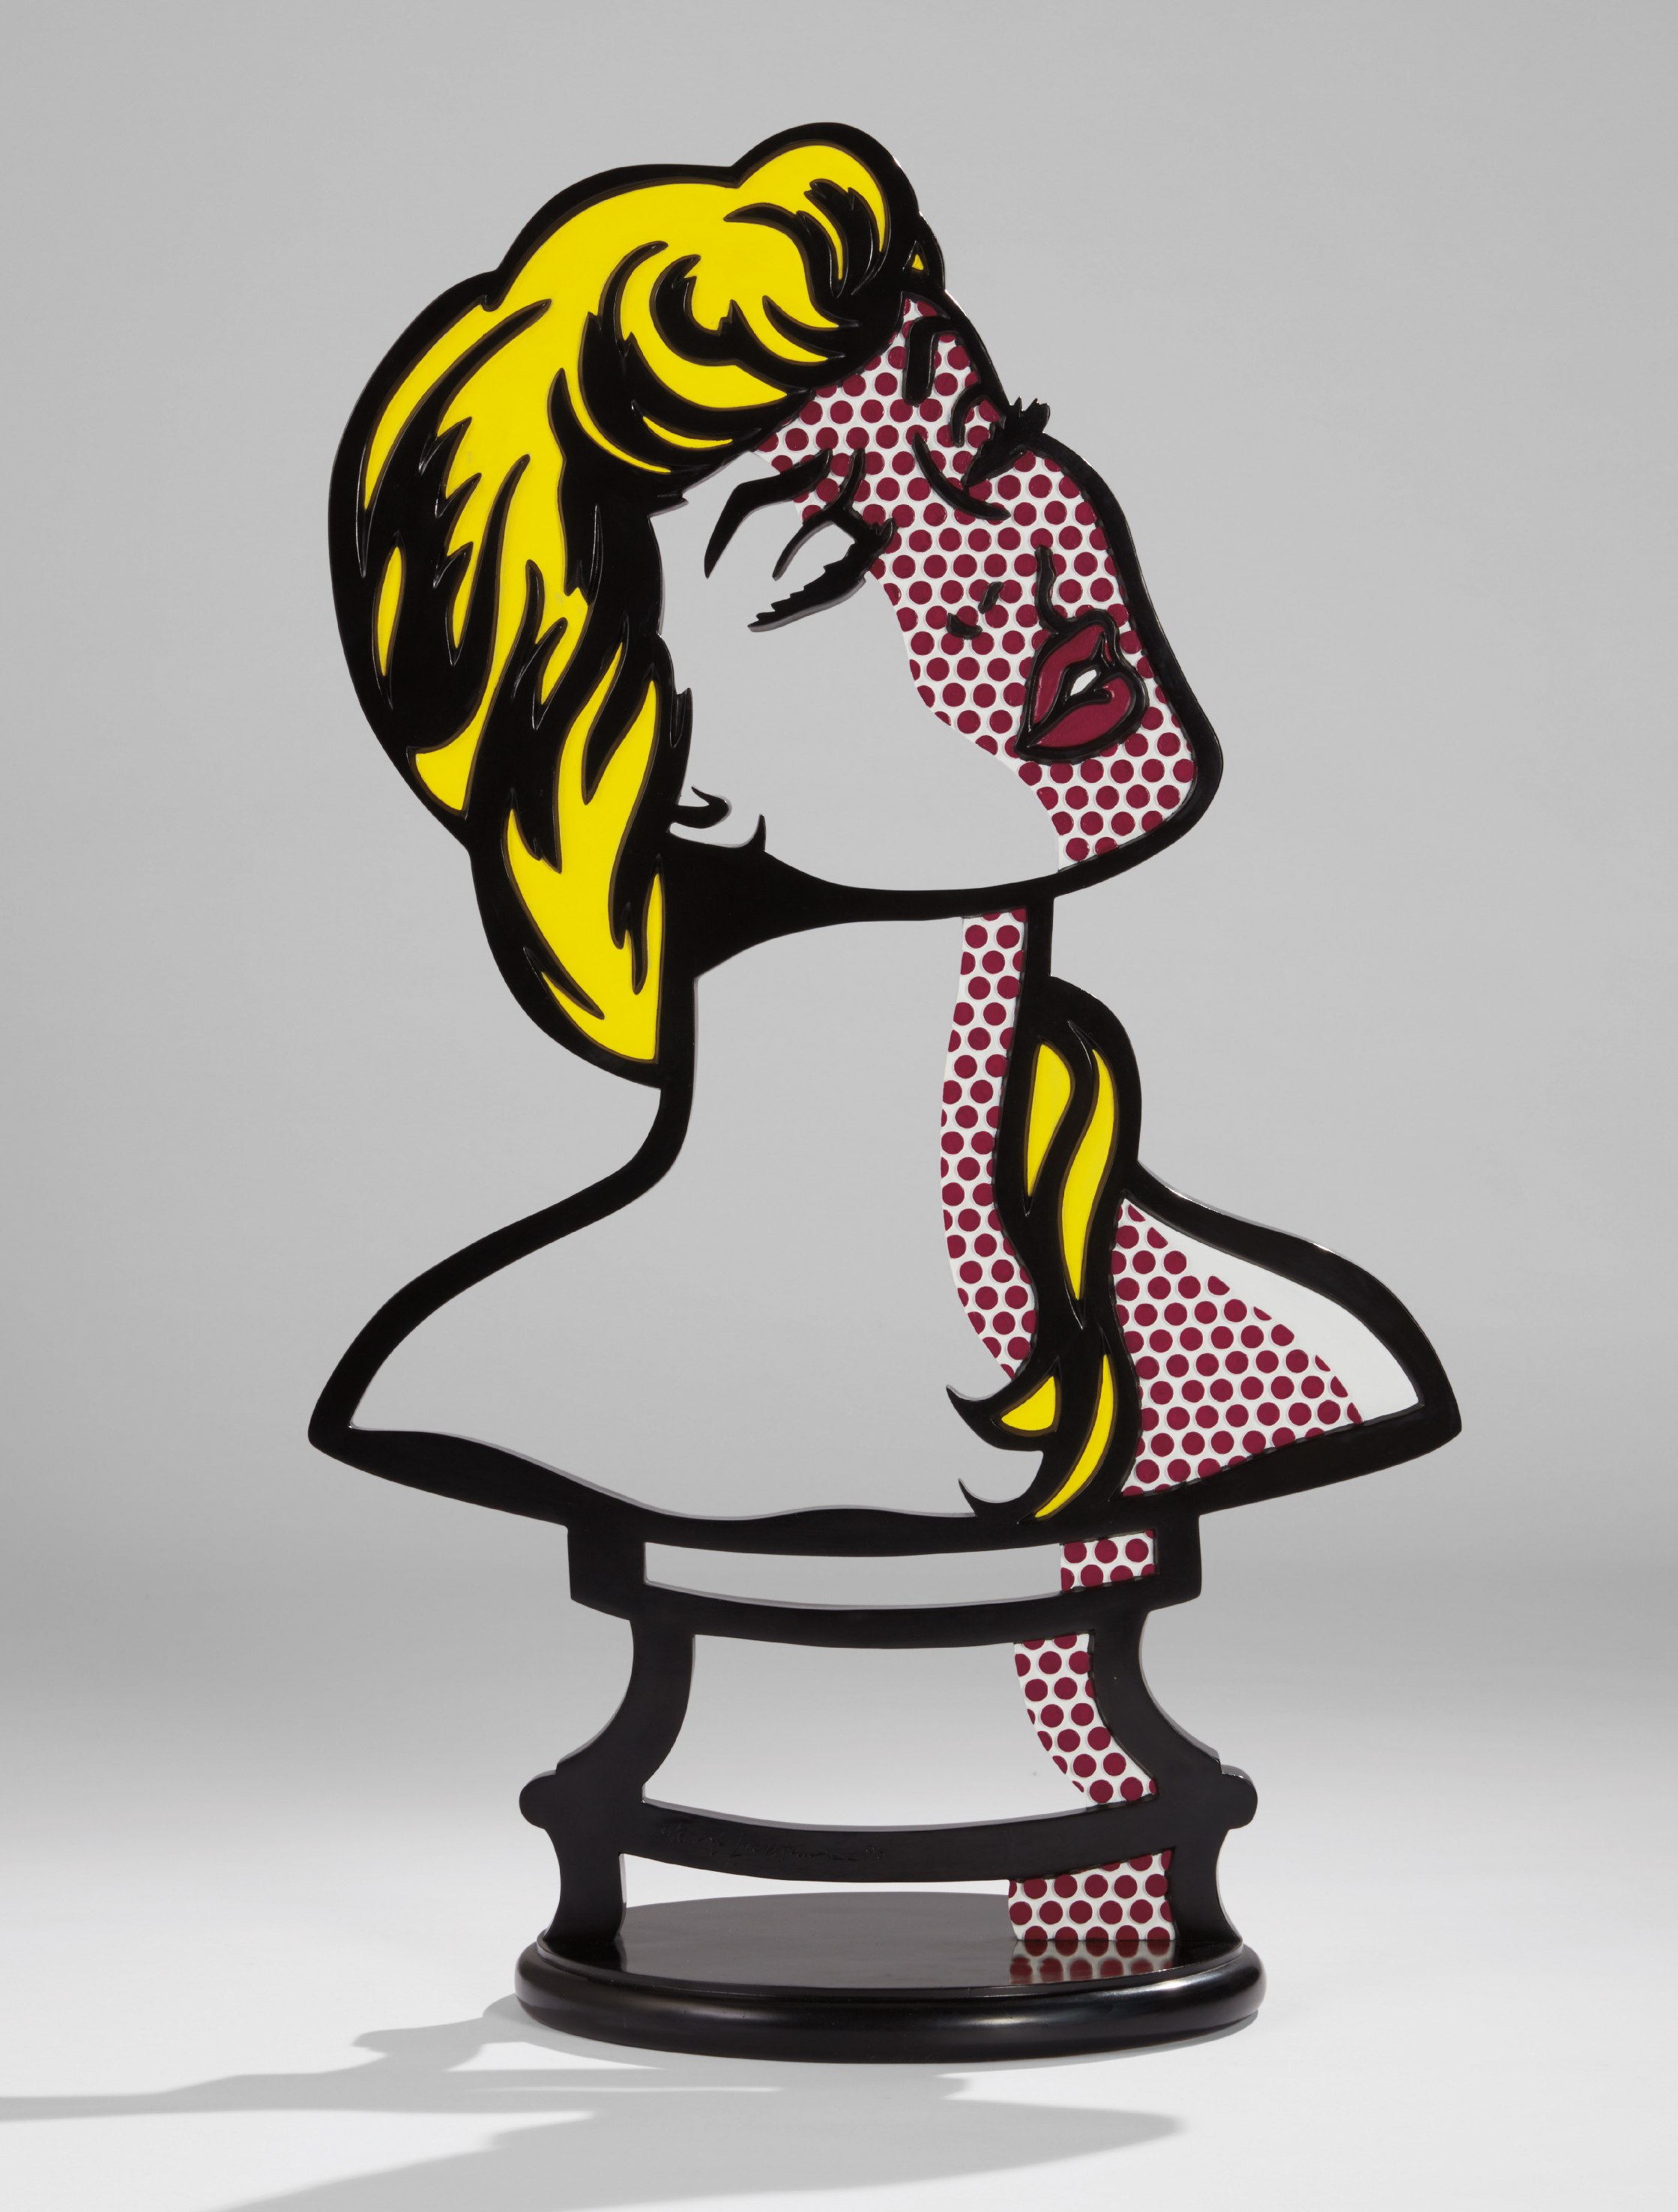 Woman: Sunlight, Moonlight, a 1996 limited edition painted and patinated bronze sculpture by Roy Lichtenstein. Phillips New York sold it in May 2017 for $10.3 million, an auction record for a sculpture by the artist.